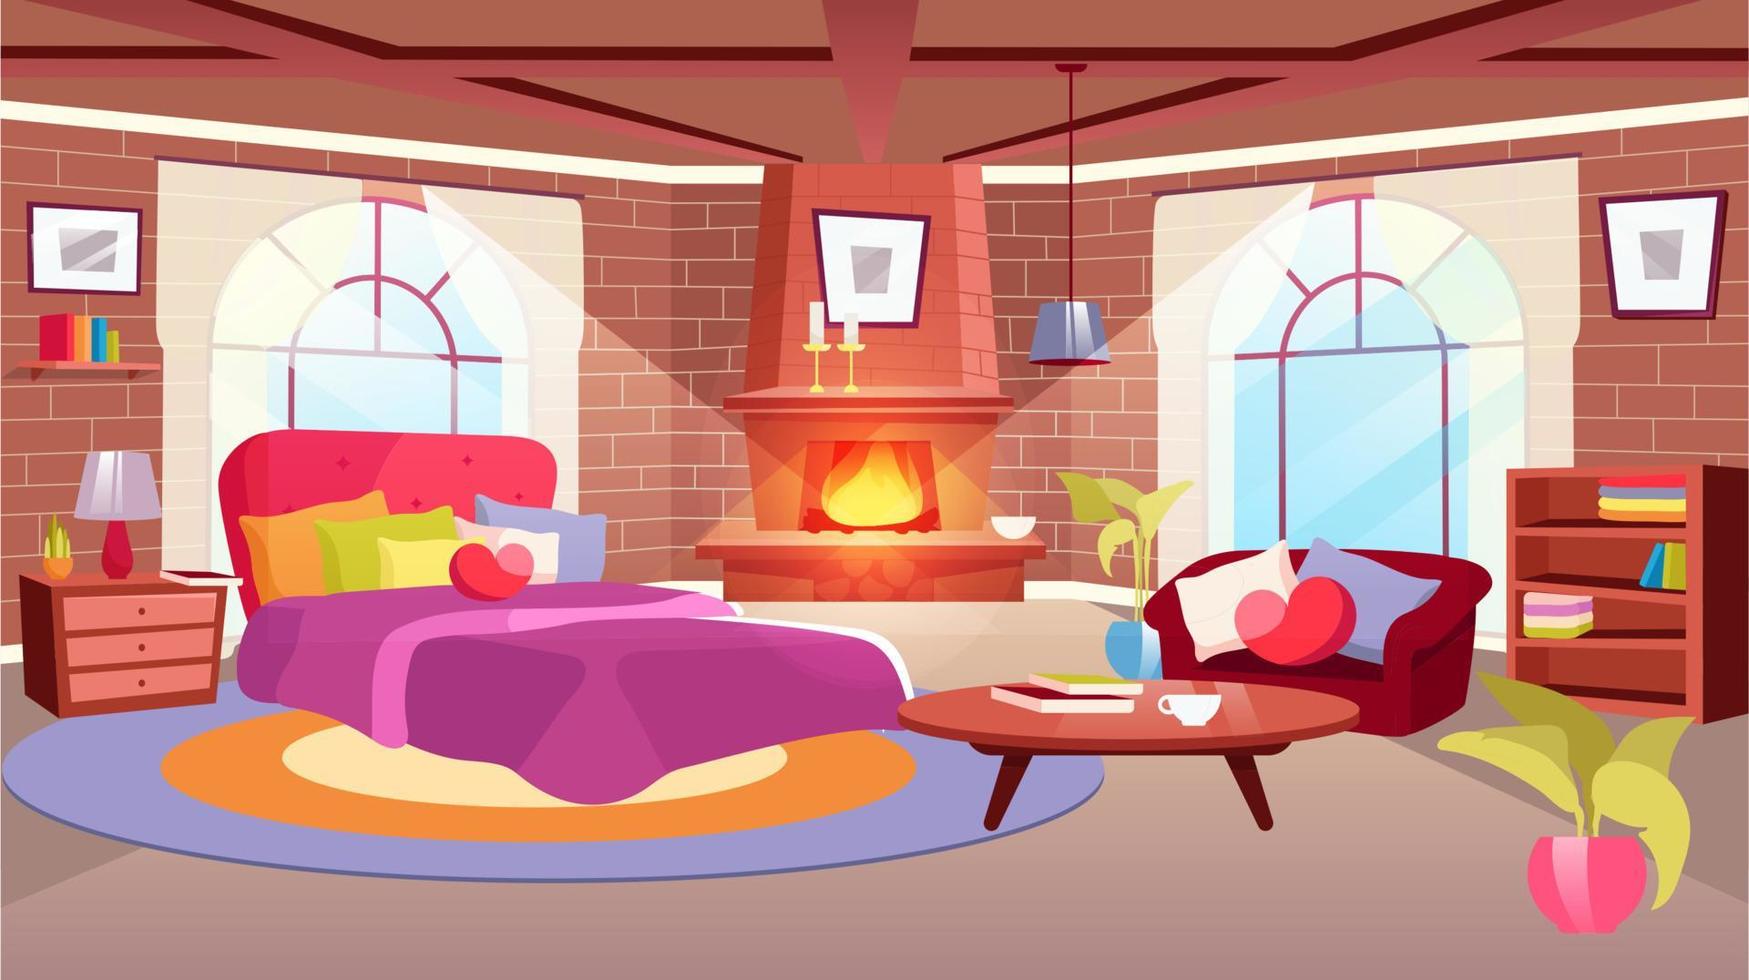 Woman bedroom interior flat vector illustration. Cartoon sofa, bed with cute heart-shaped pillow. Sunlit apartment with modern furniture. Wooden coffee table, bookcase. Brick wall fireplace with flame